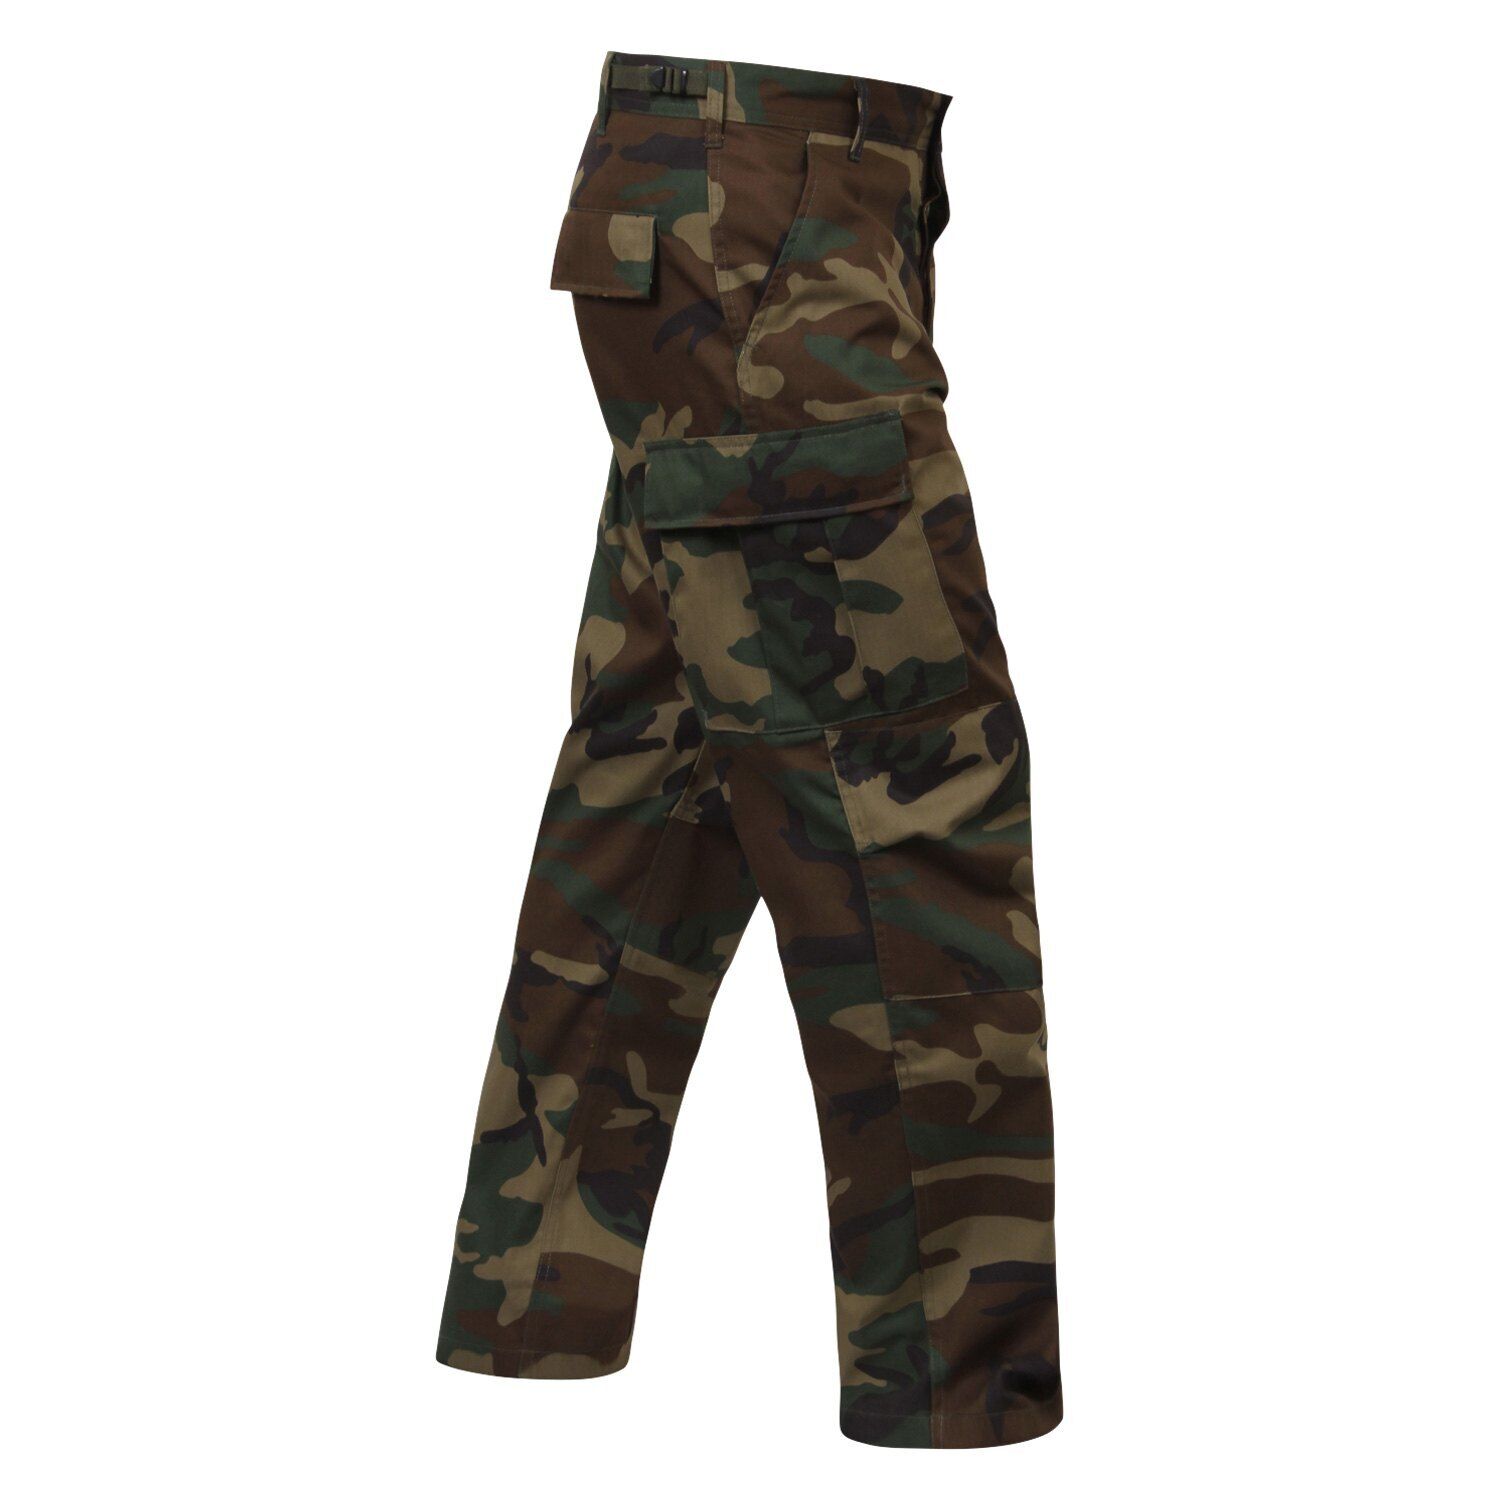 Rothco Military Camouflage BDU Cargo Army Fatigue Combat Pants (Choose Sizes)